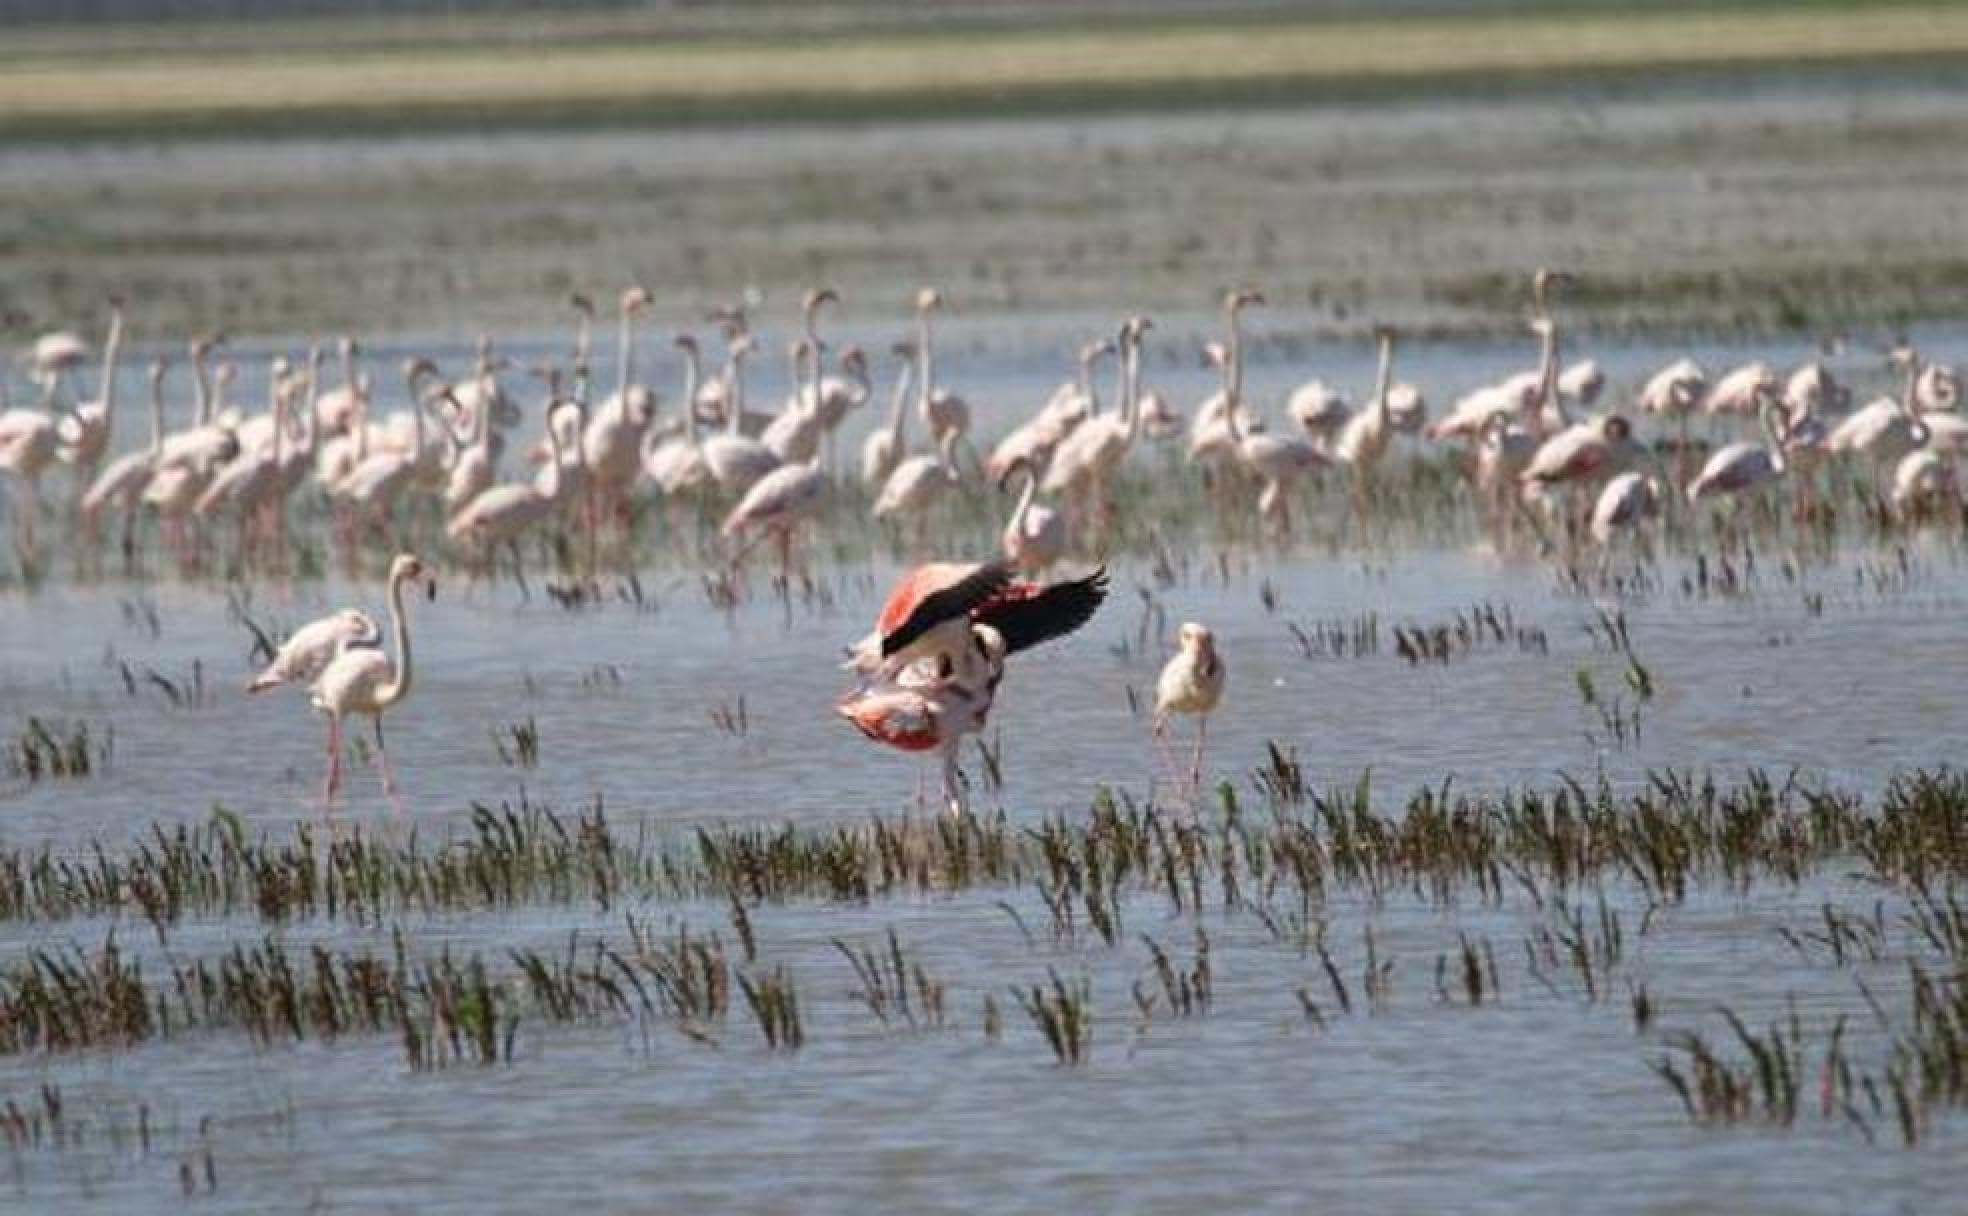 Africa or southern Spain? Later in the year flamingos make Doñana reminiscent of the expansive lakes of east Africa..